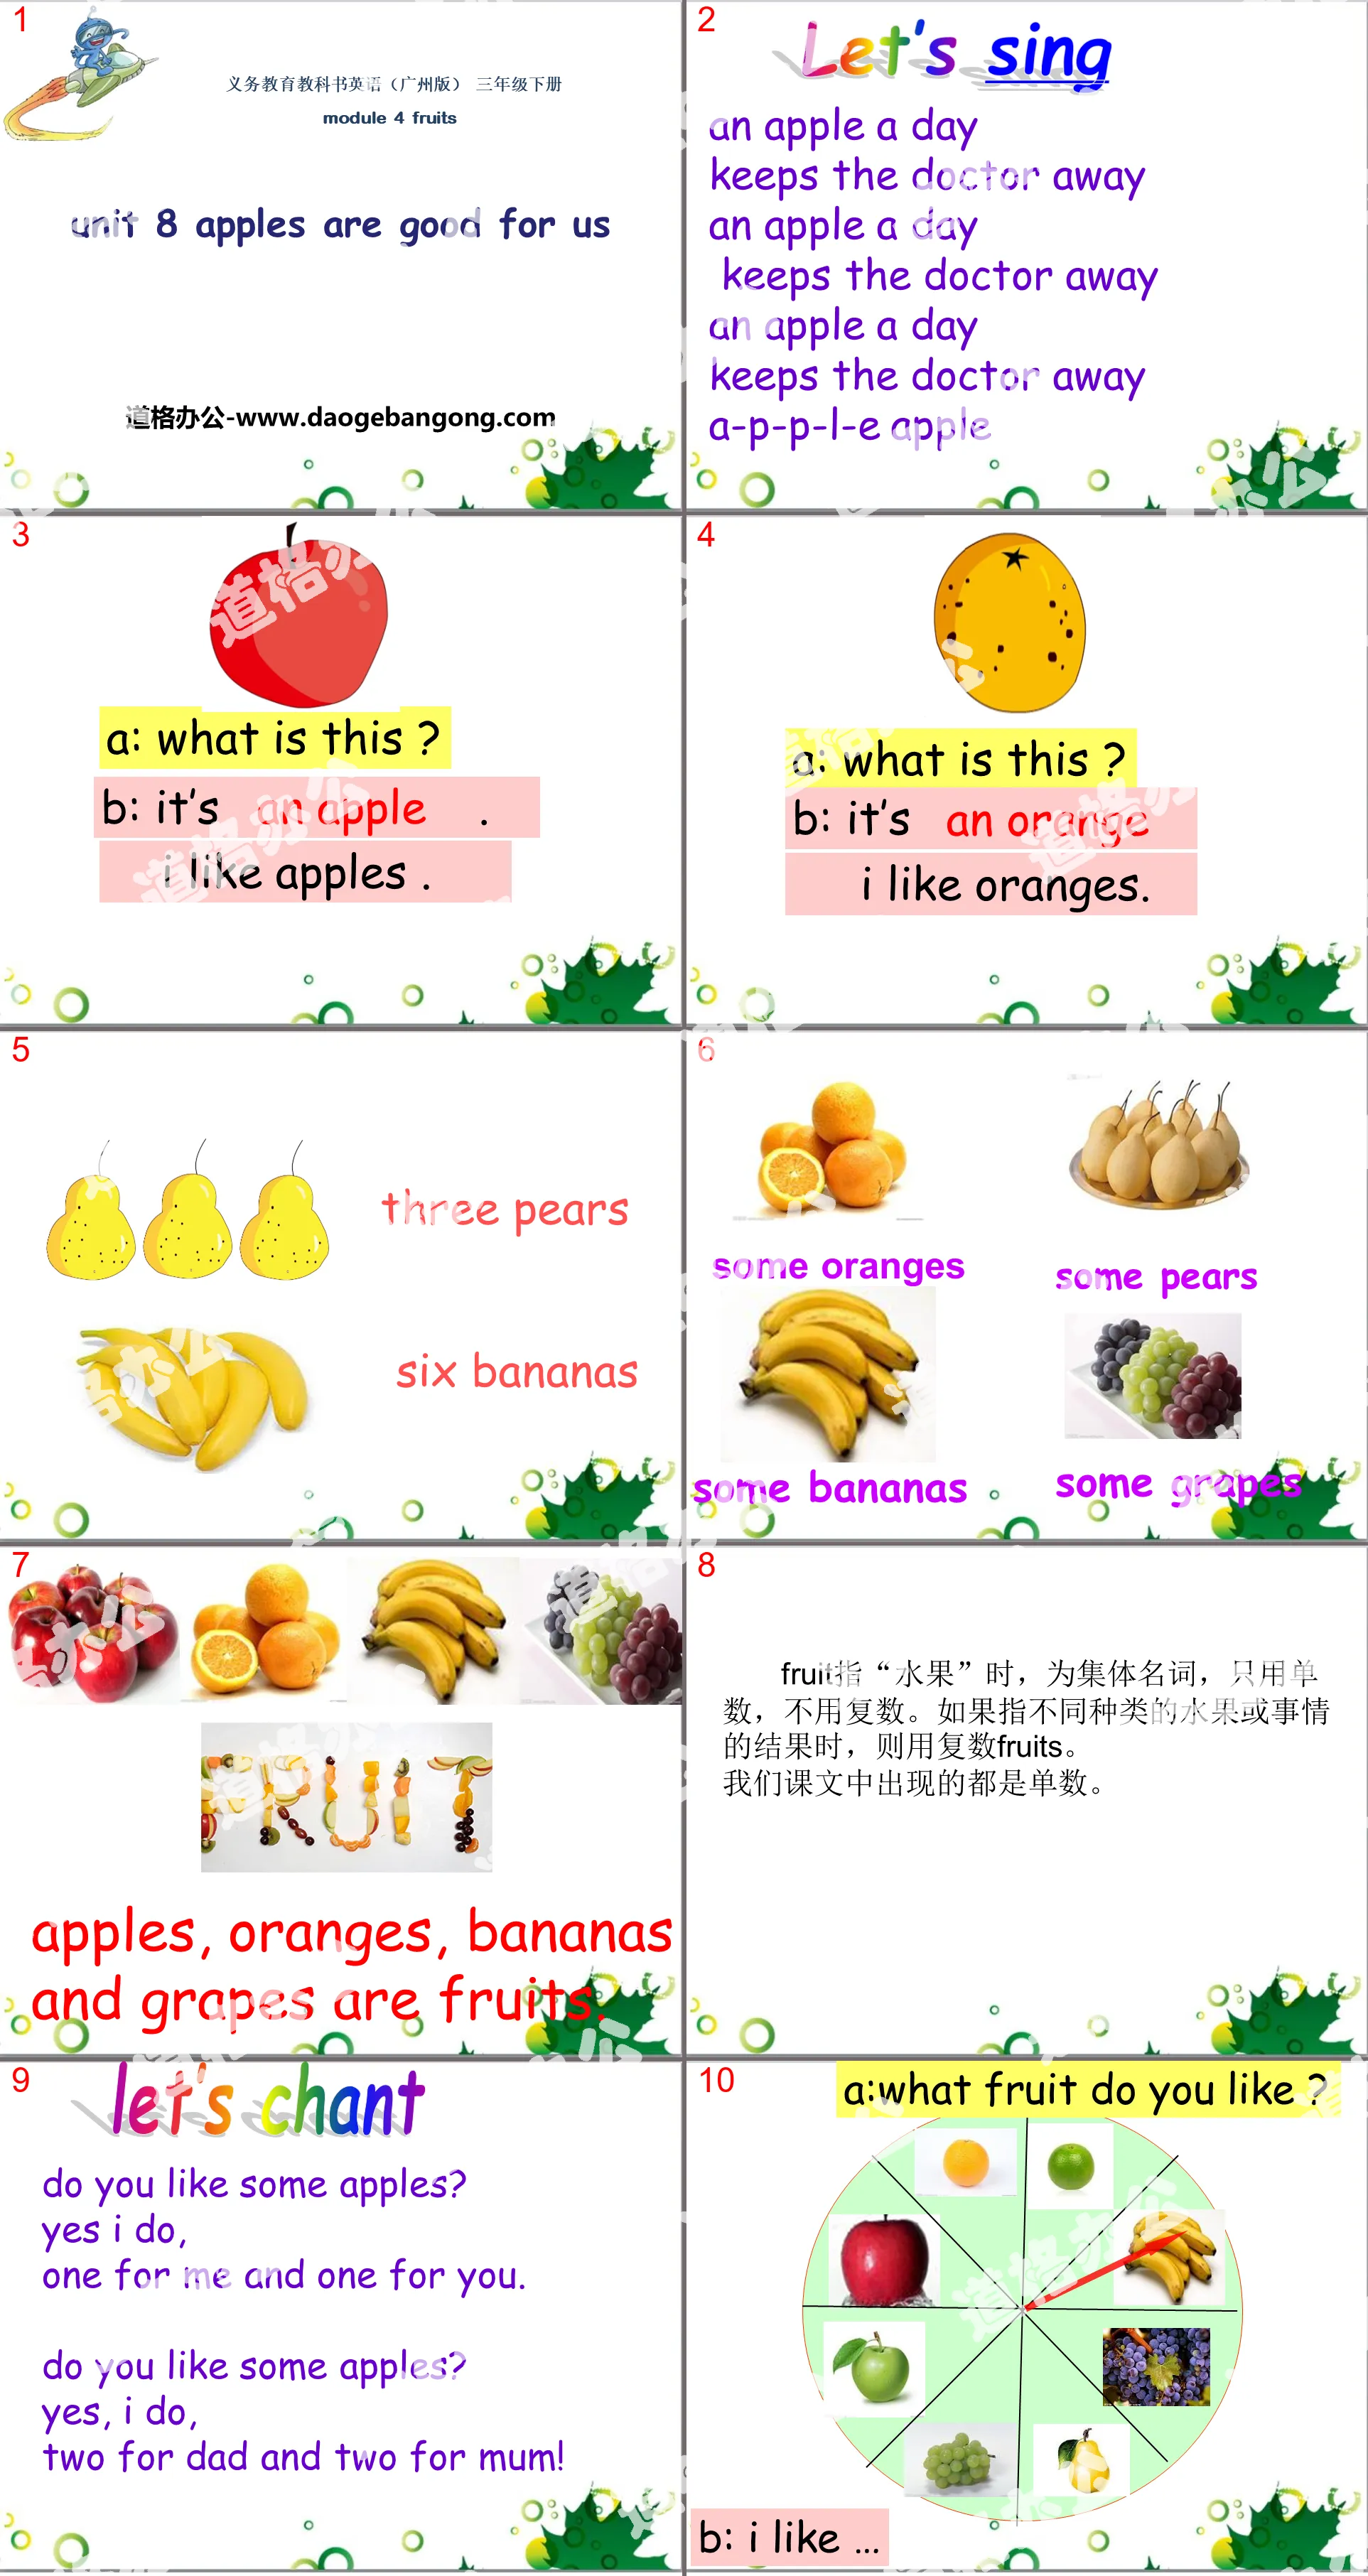 "Apples are good for us" PPT